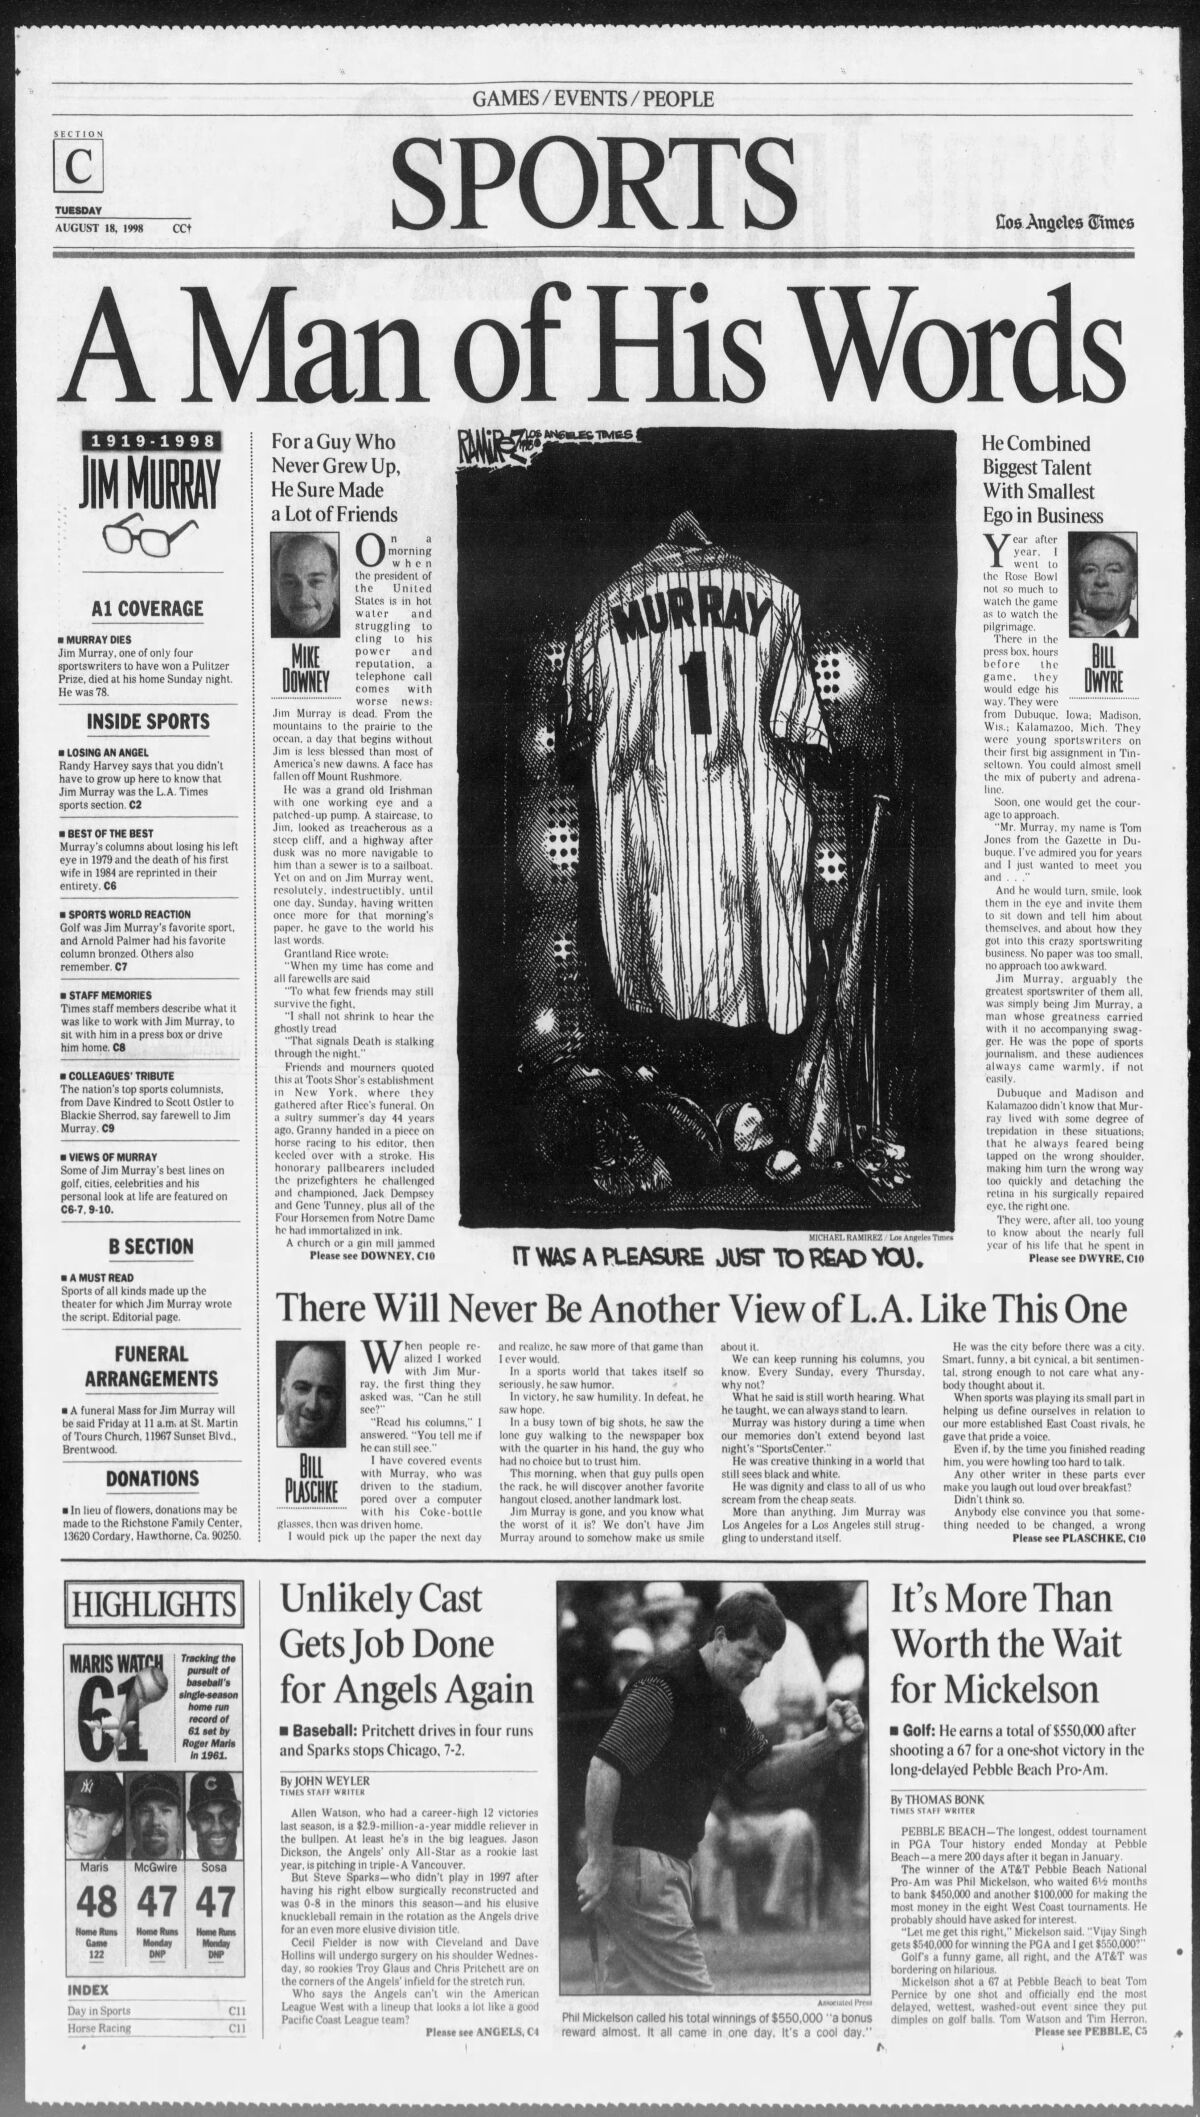 The cover of the Los Angeles Times Sports section on Aug. 18, 1998, after Jim Murray's death.